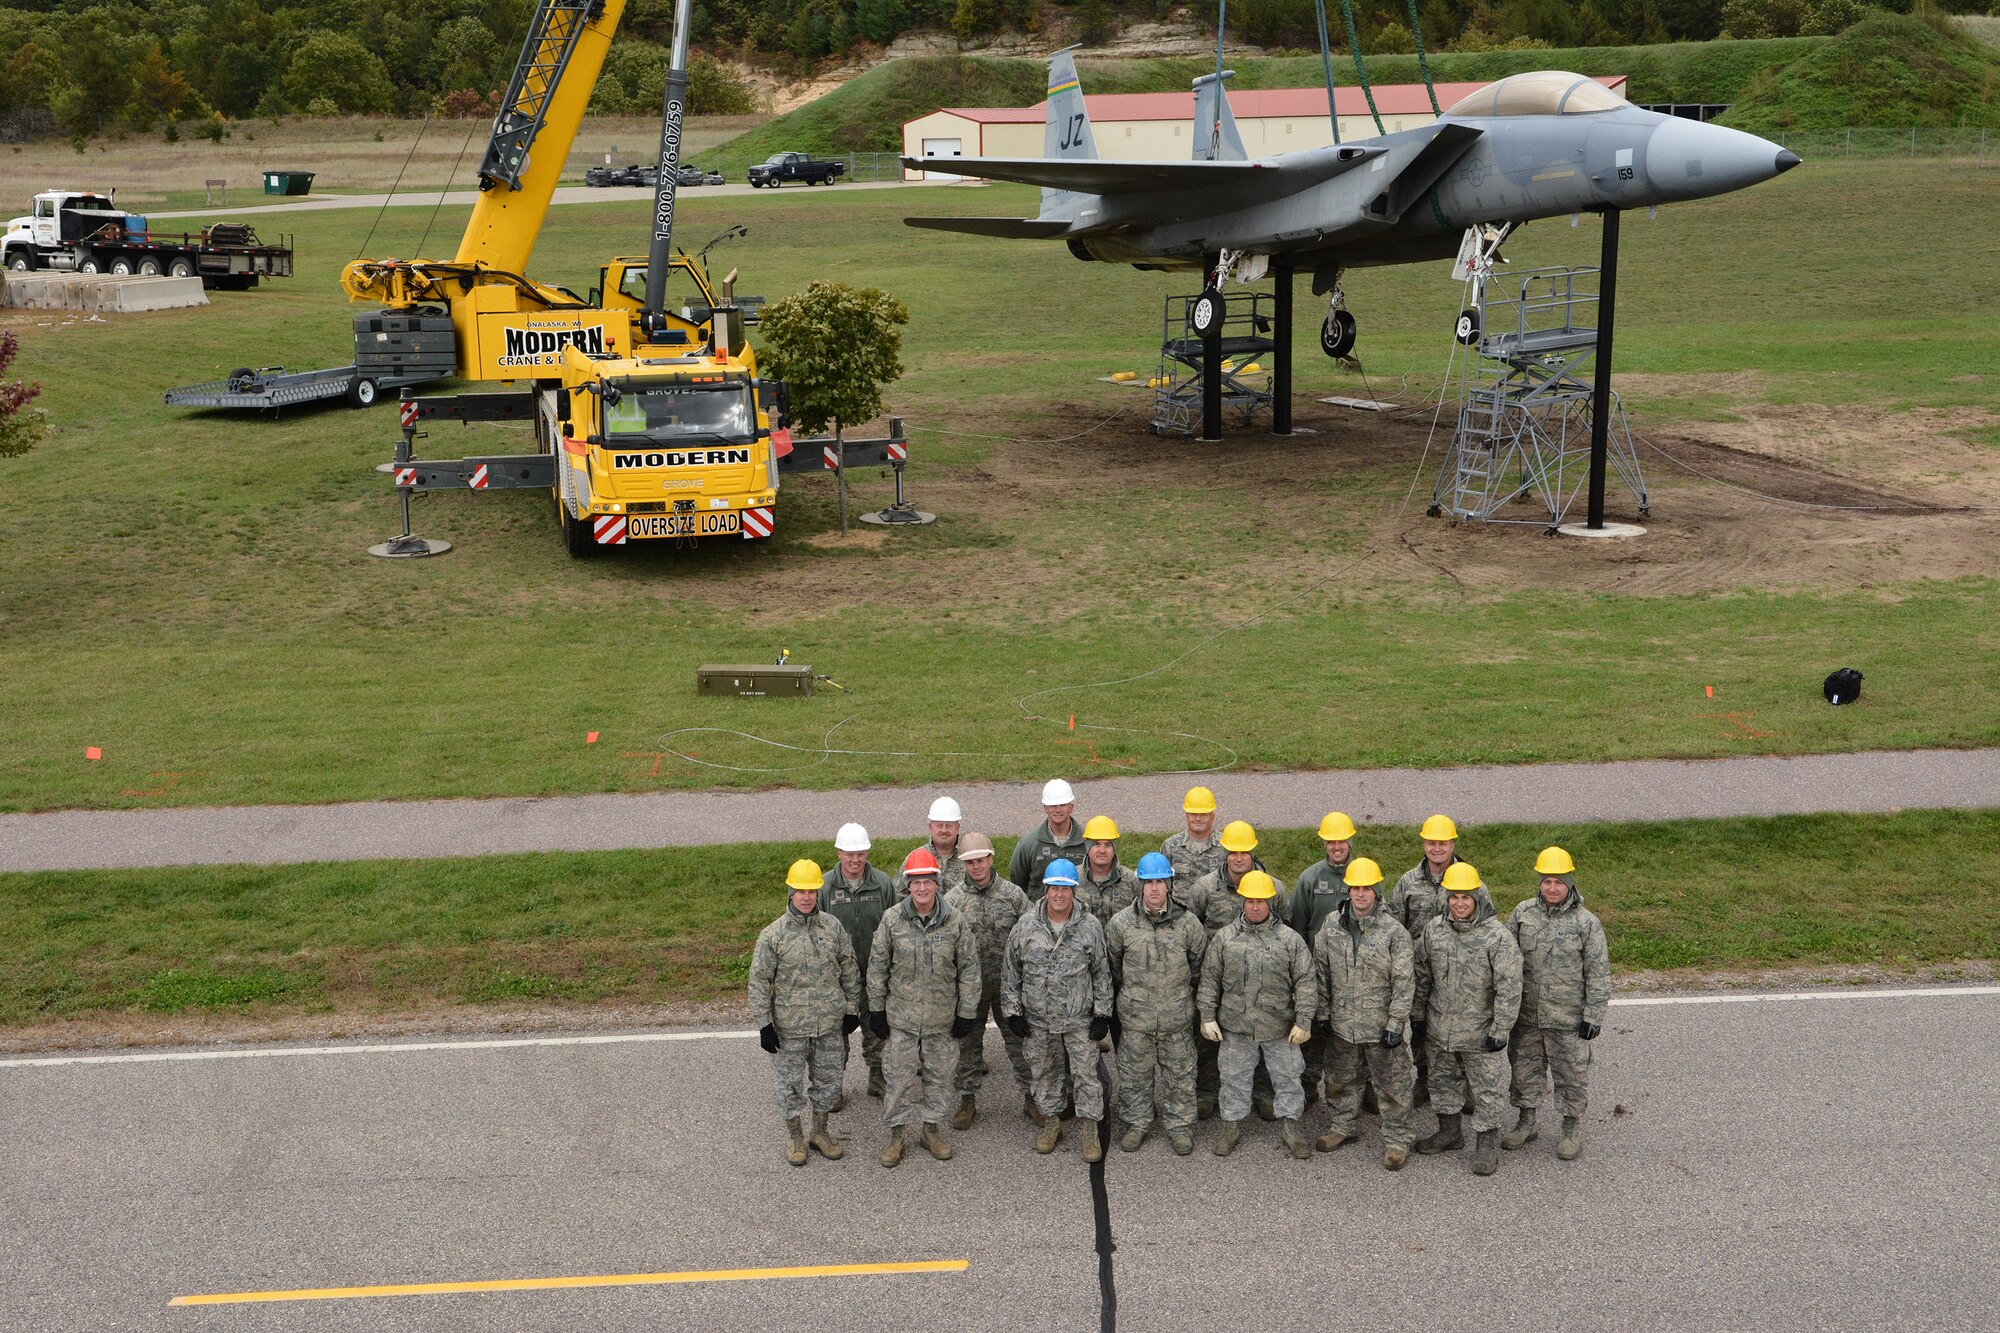 Airmen from the Crash, Damage, Disabled Aircraft Recovery training team pose in front of a jet they recovered during an exercise at Volk Field Air National Guard Base, Camp Douglas, Wis., Oct. 4, 2014. CDDAR teams from across the nation were tested with simulated aircraft crash exercises, and as their leadership stood back, were forced to make decisions on how to transport and/or recover the aircraft. (U.S. Air National Guard photo by Staff Sgt. Ryan Roth)
